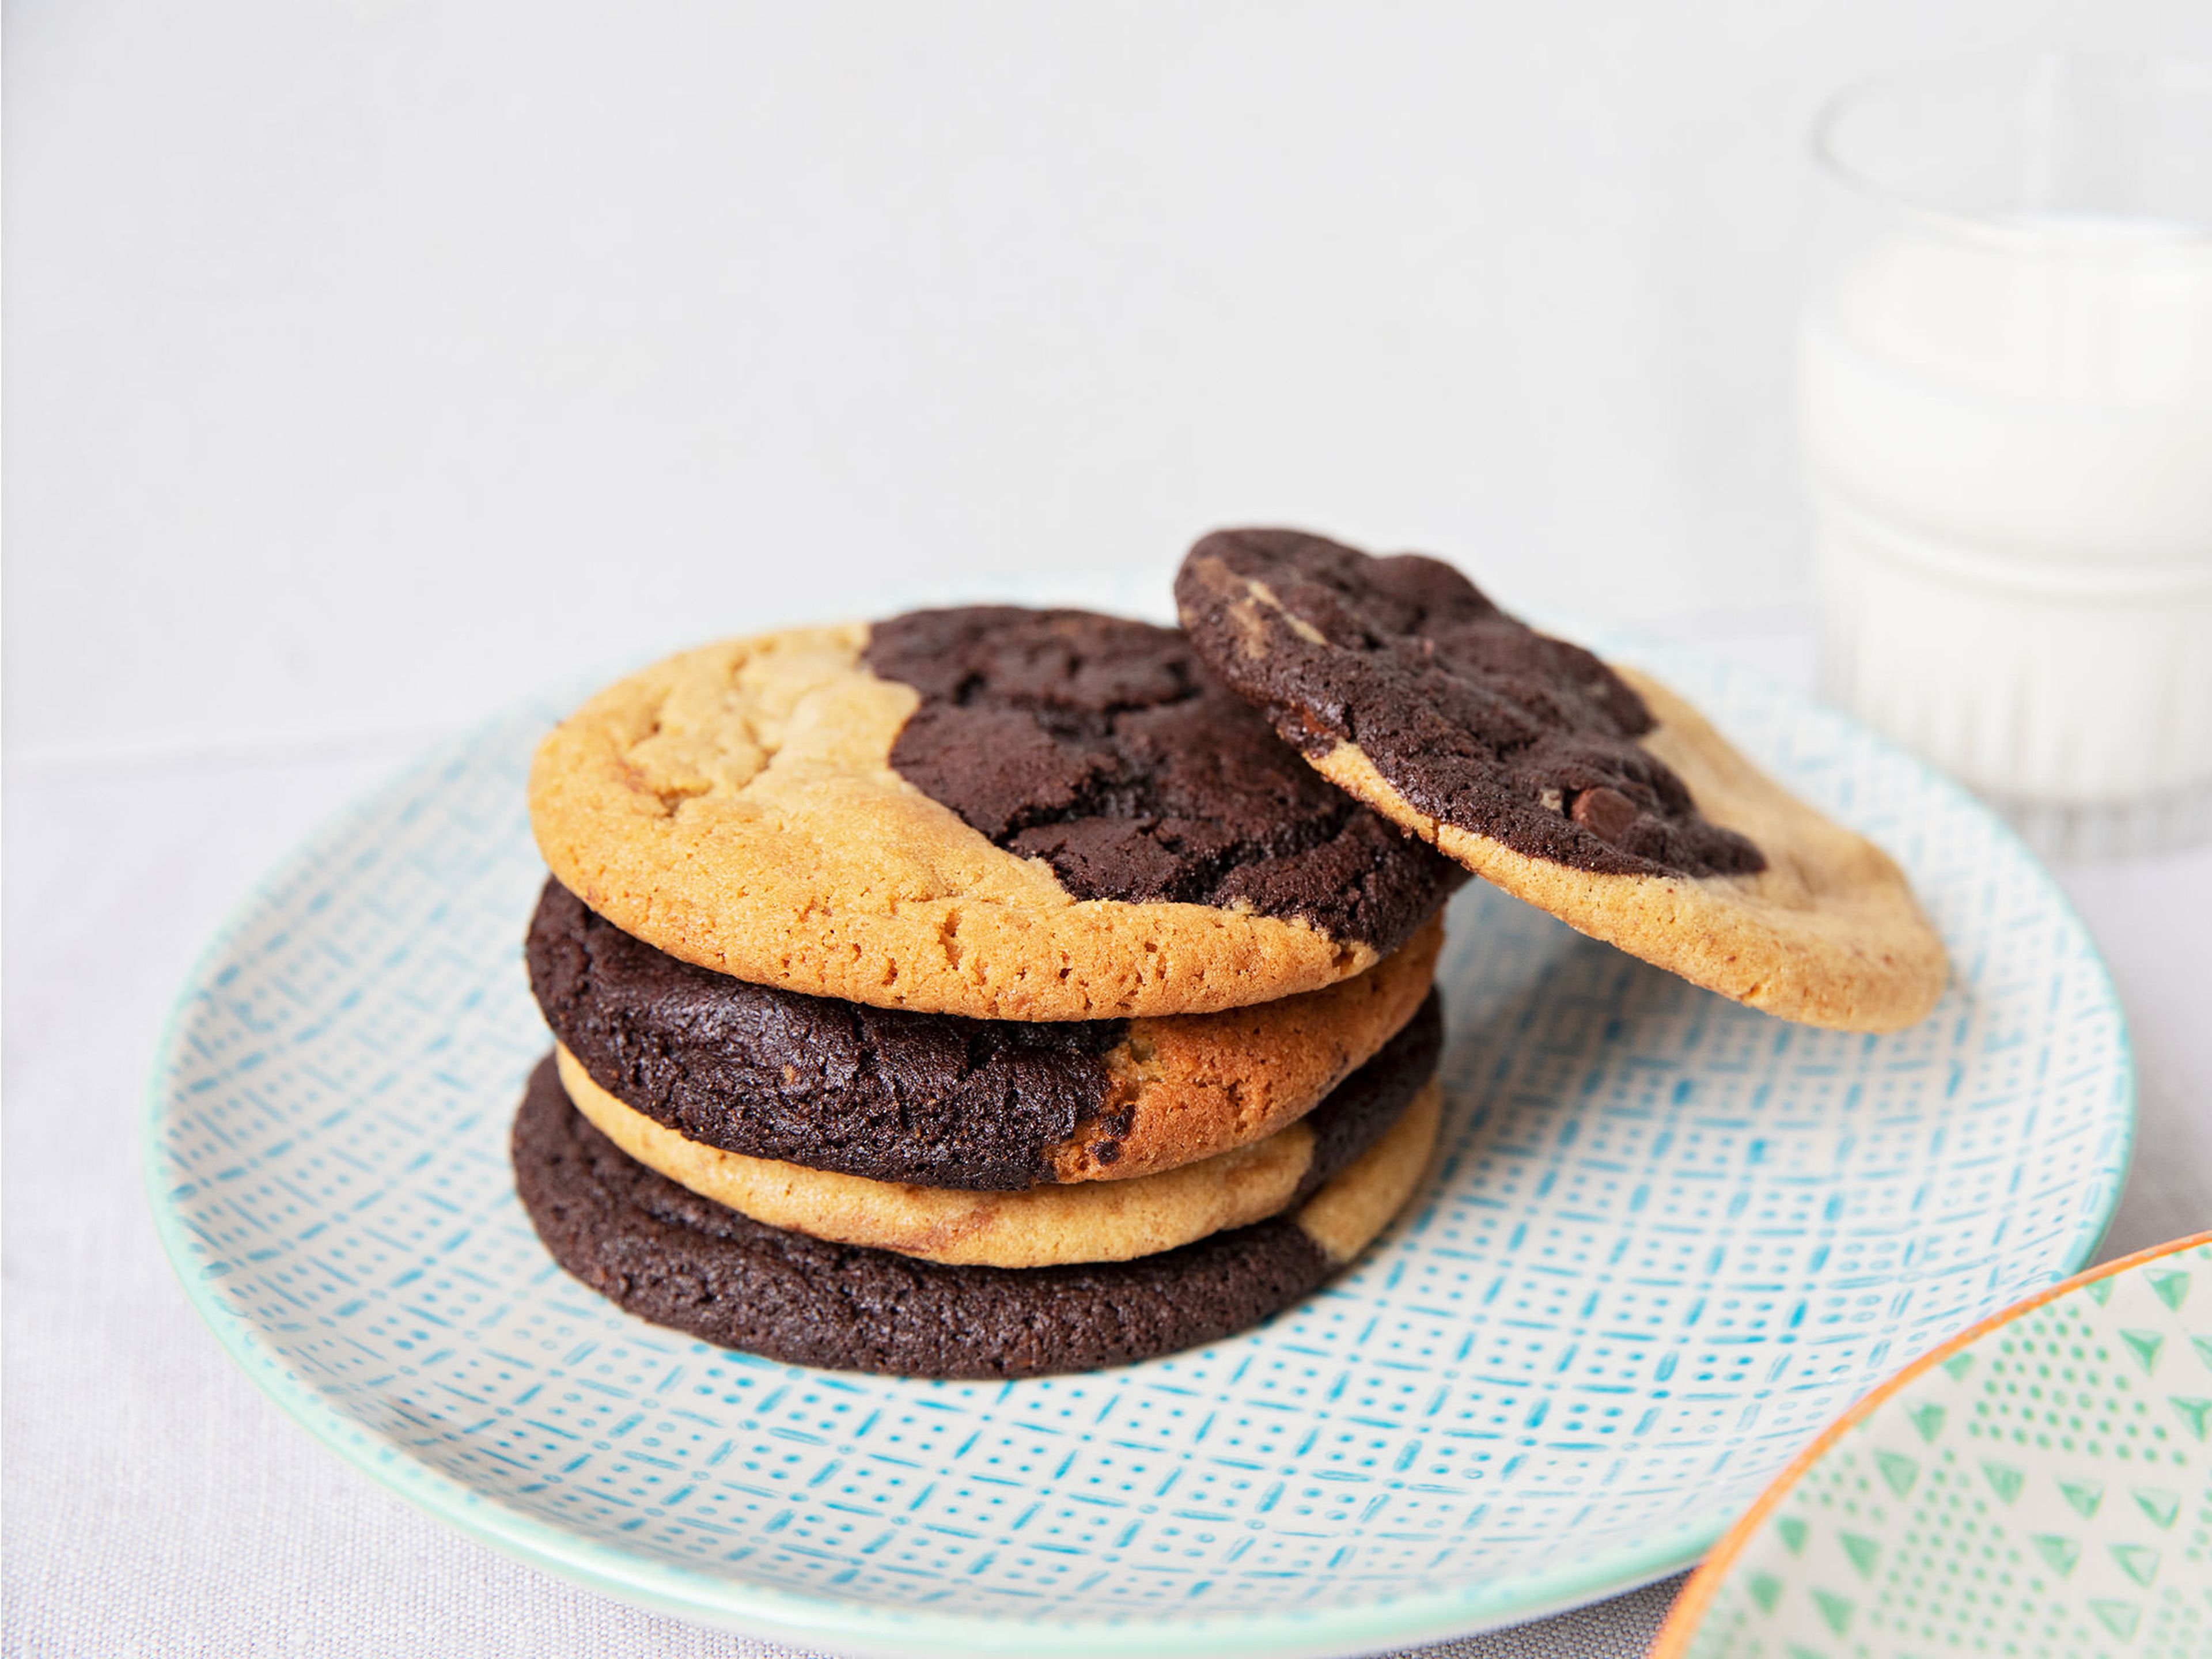 Half-and-half cookies with peanut butter